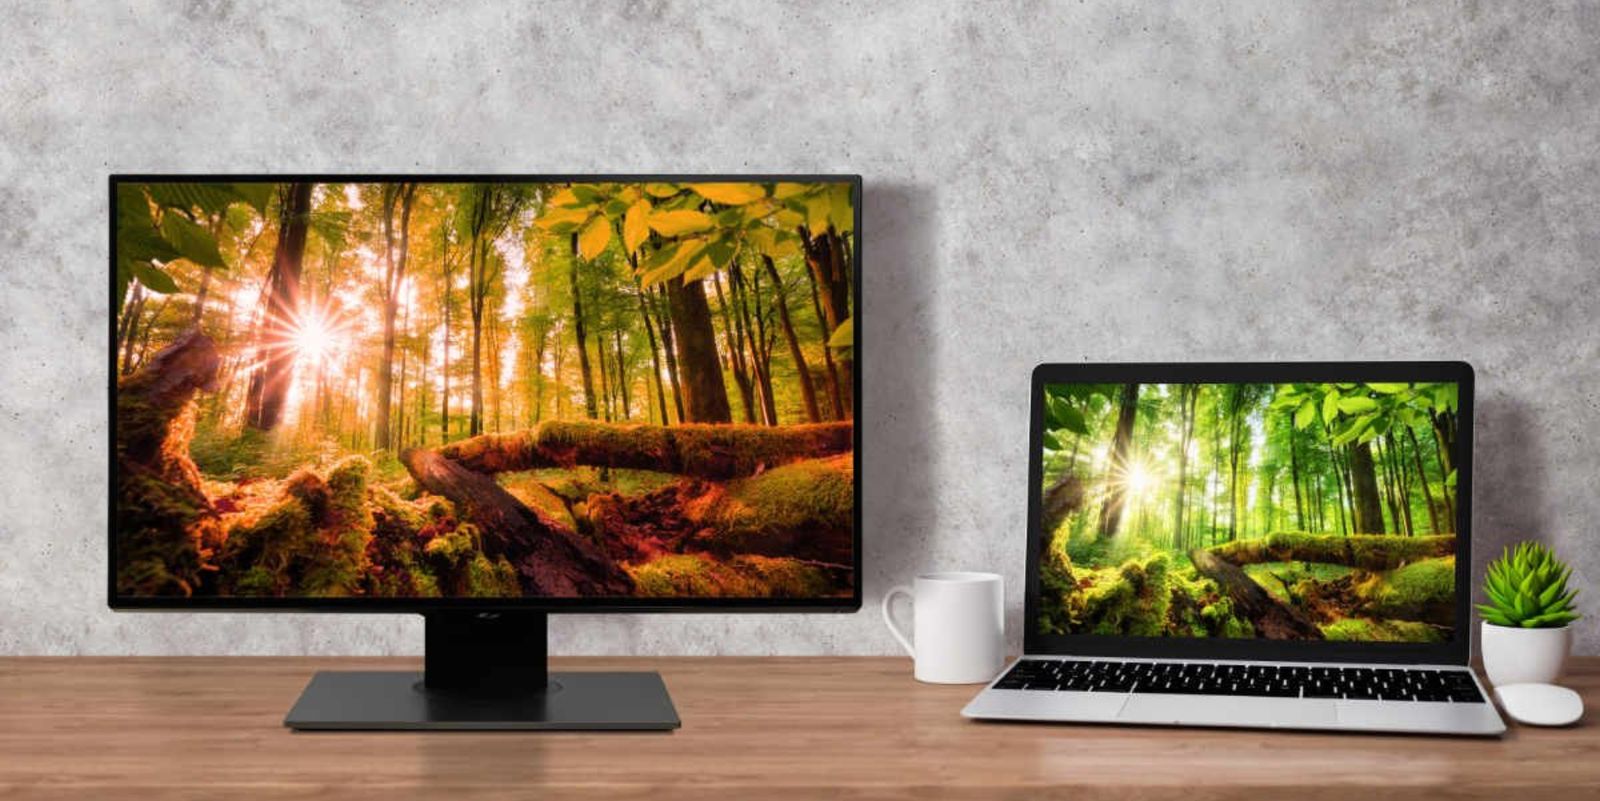 What is resolution - Image of a black monitor featuring an image of a forest on the display next to a laptop also with an image of forest on the display.